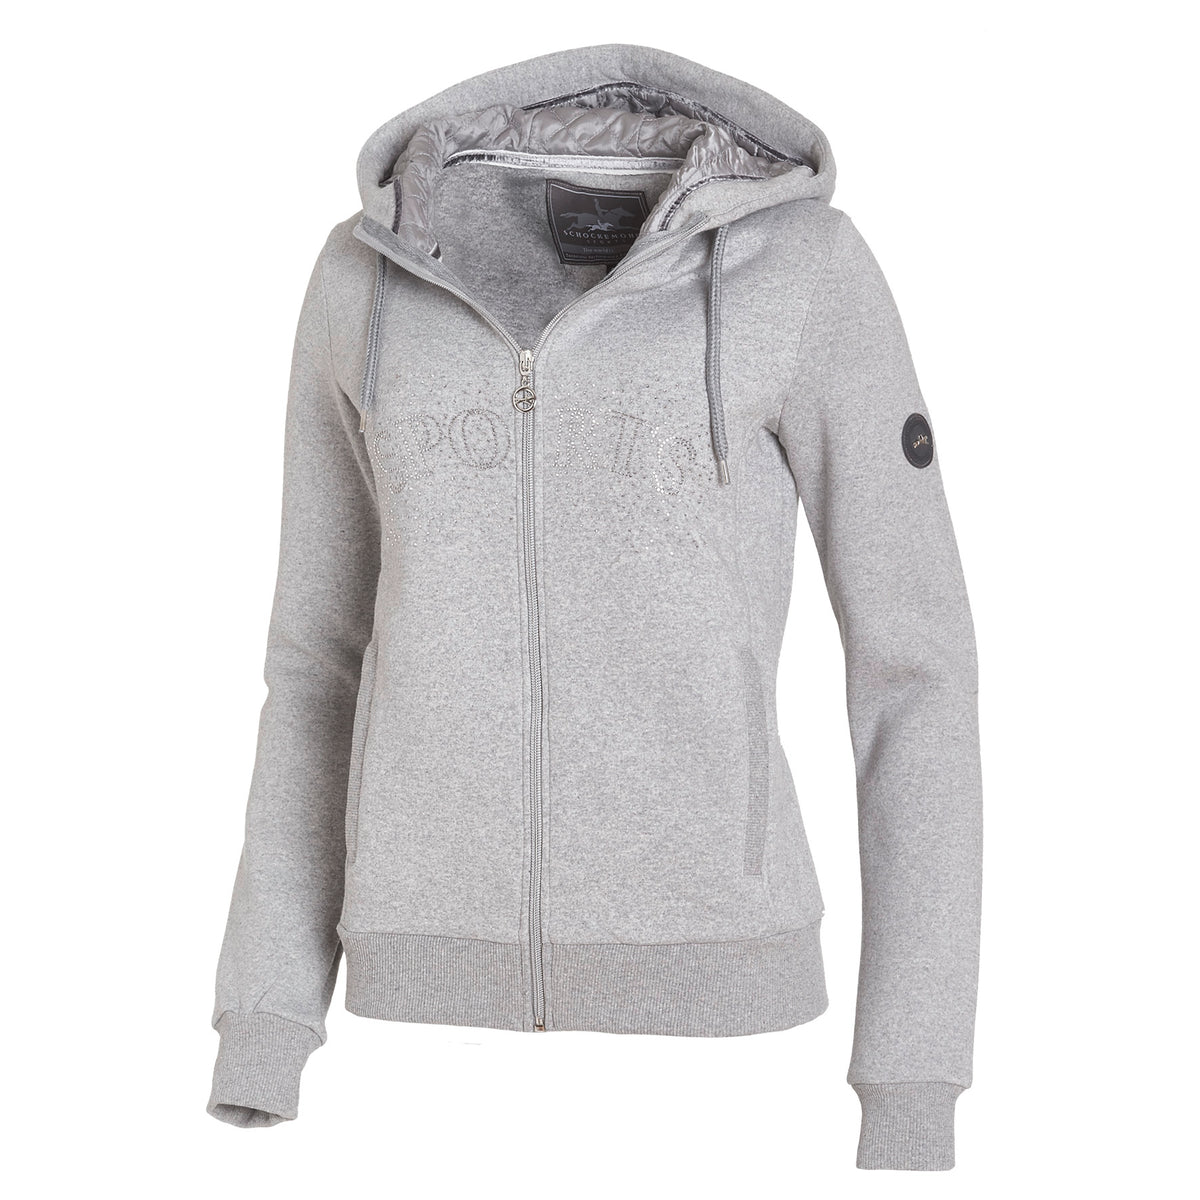 Schockemohle Cassie Ladies Sweat Jacket - Christmas Clearance